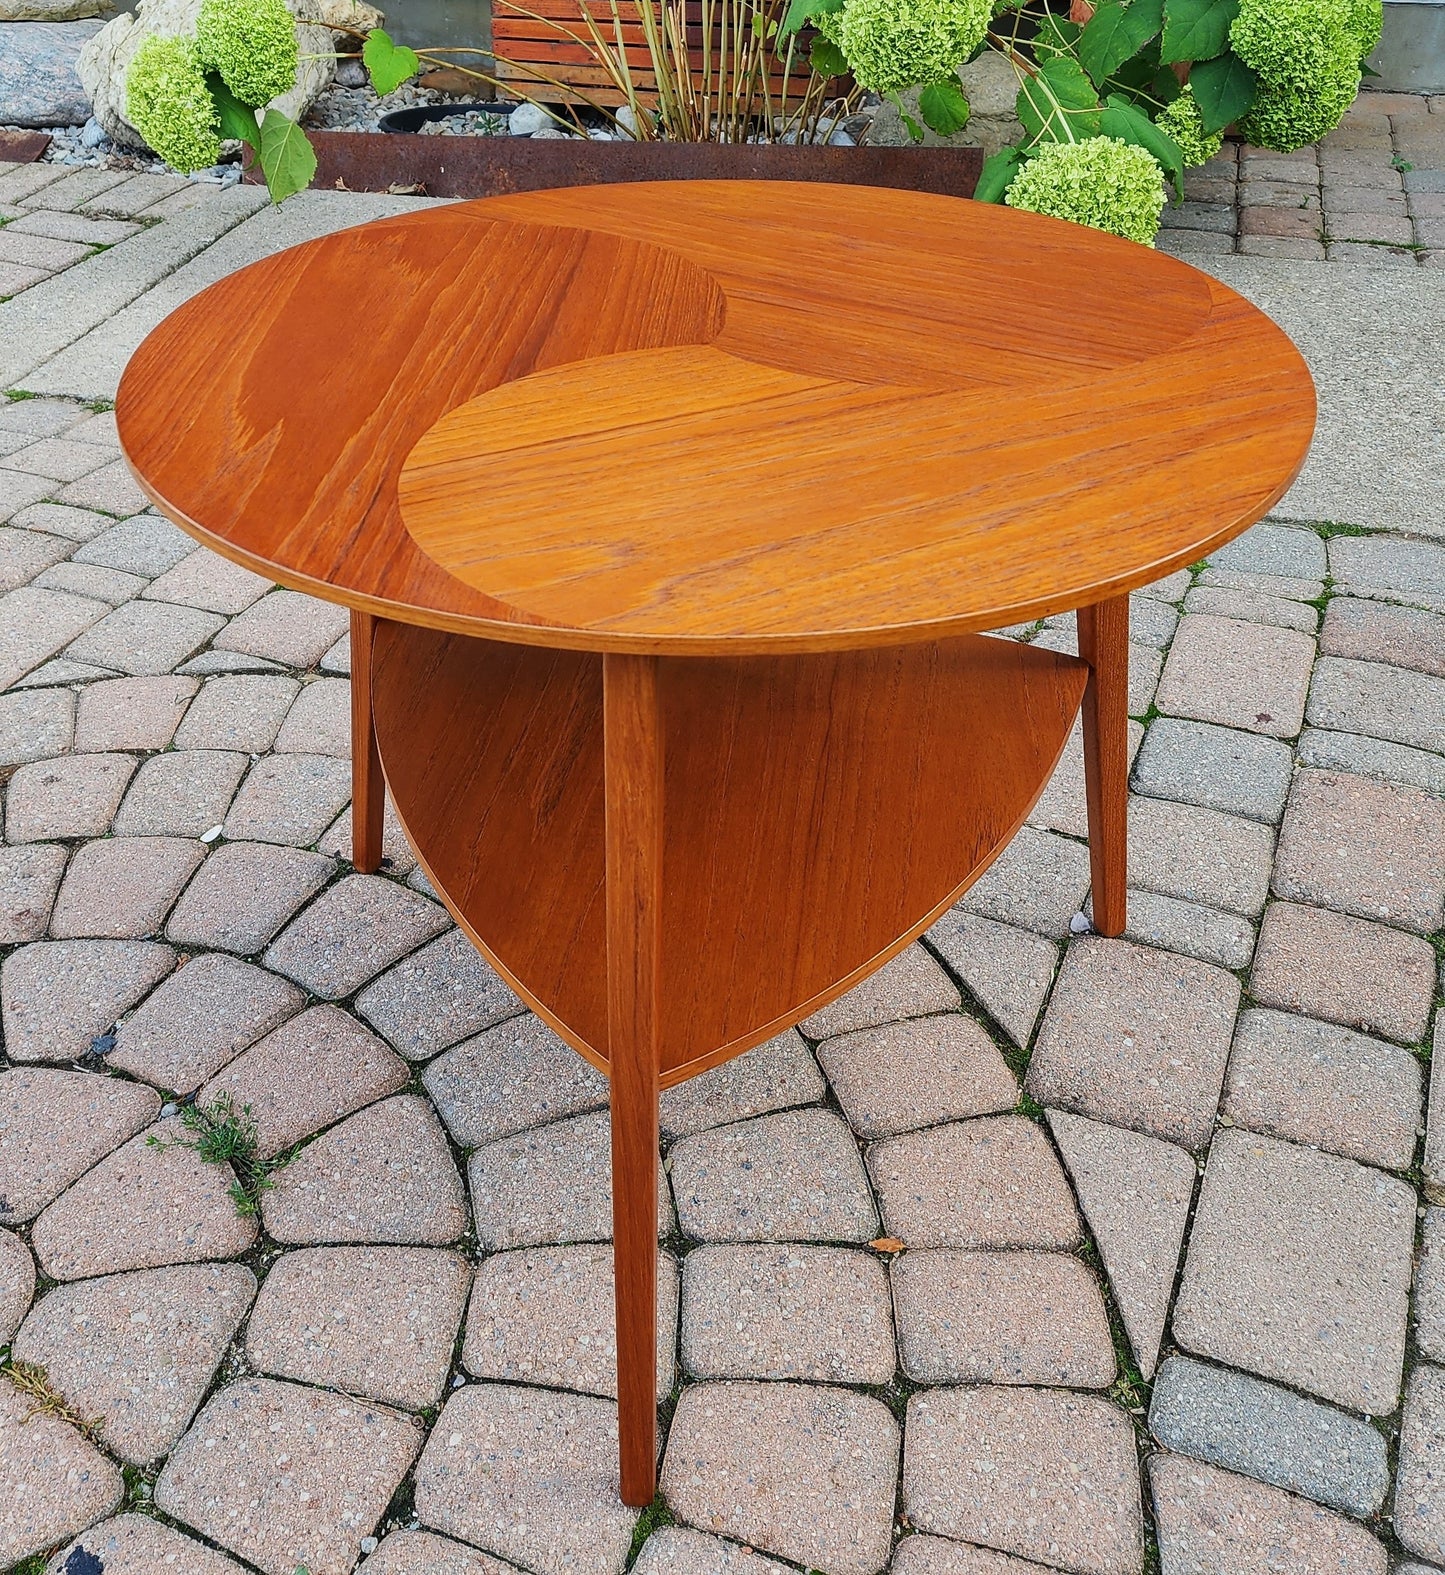 REFINISHED Danish Mid Century Modern Teak Accent Table by H. G. Jensen for Kubus